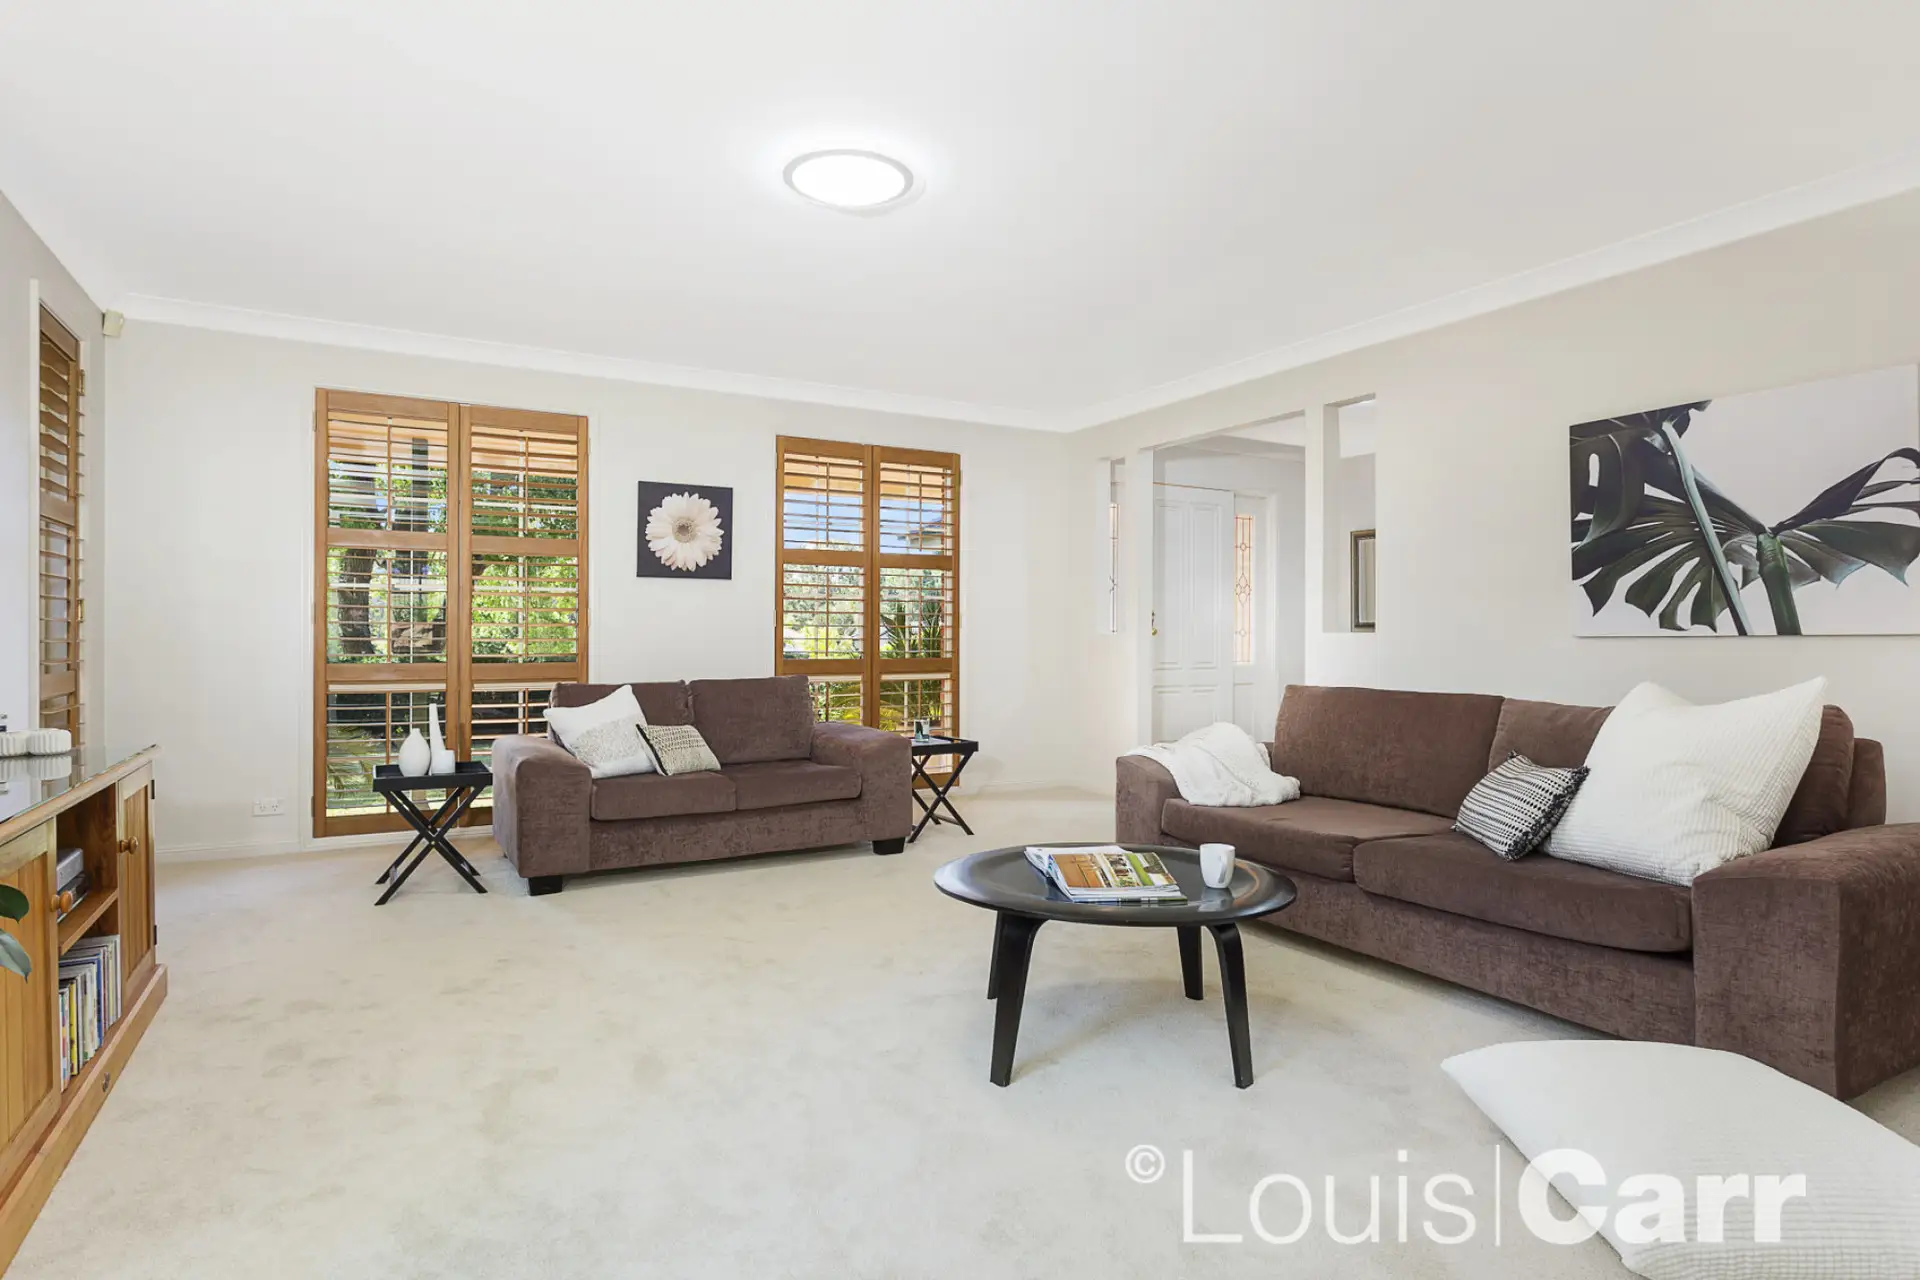 Photo #7: 4 Kincraig Court, Castle Hill - Sold by Louis Carr Real Estate